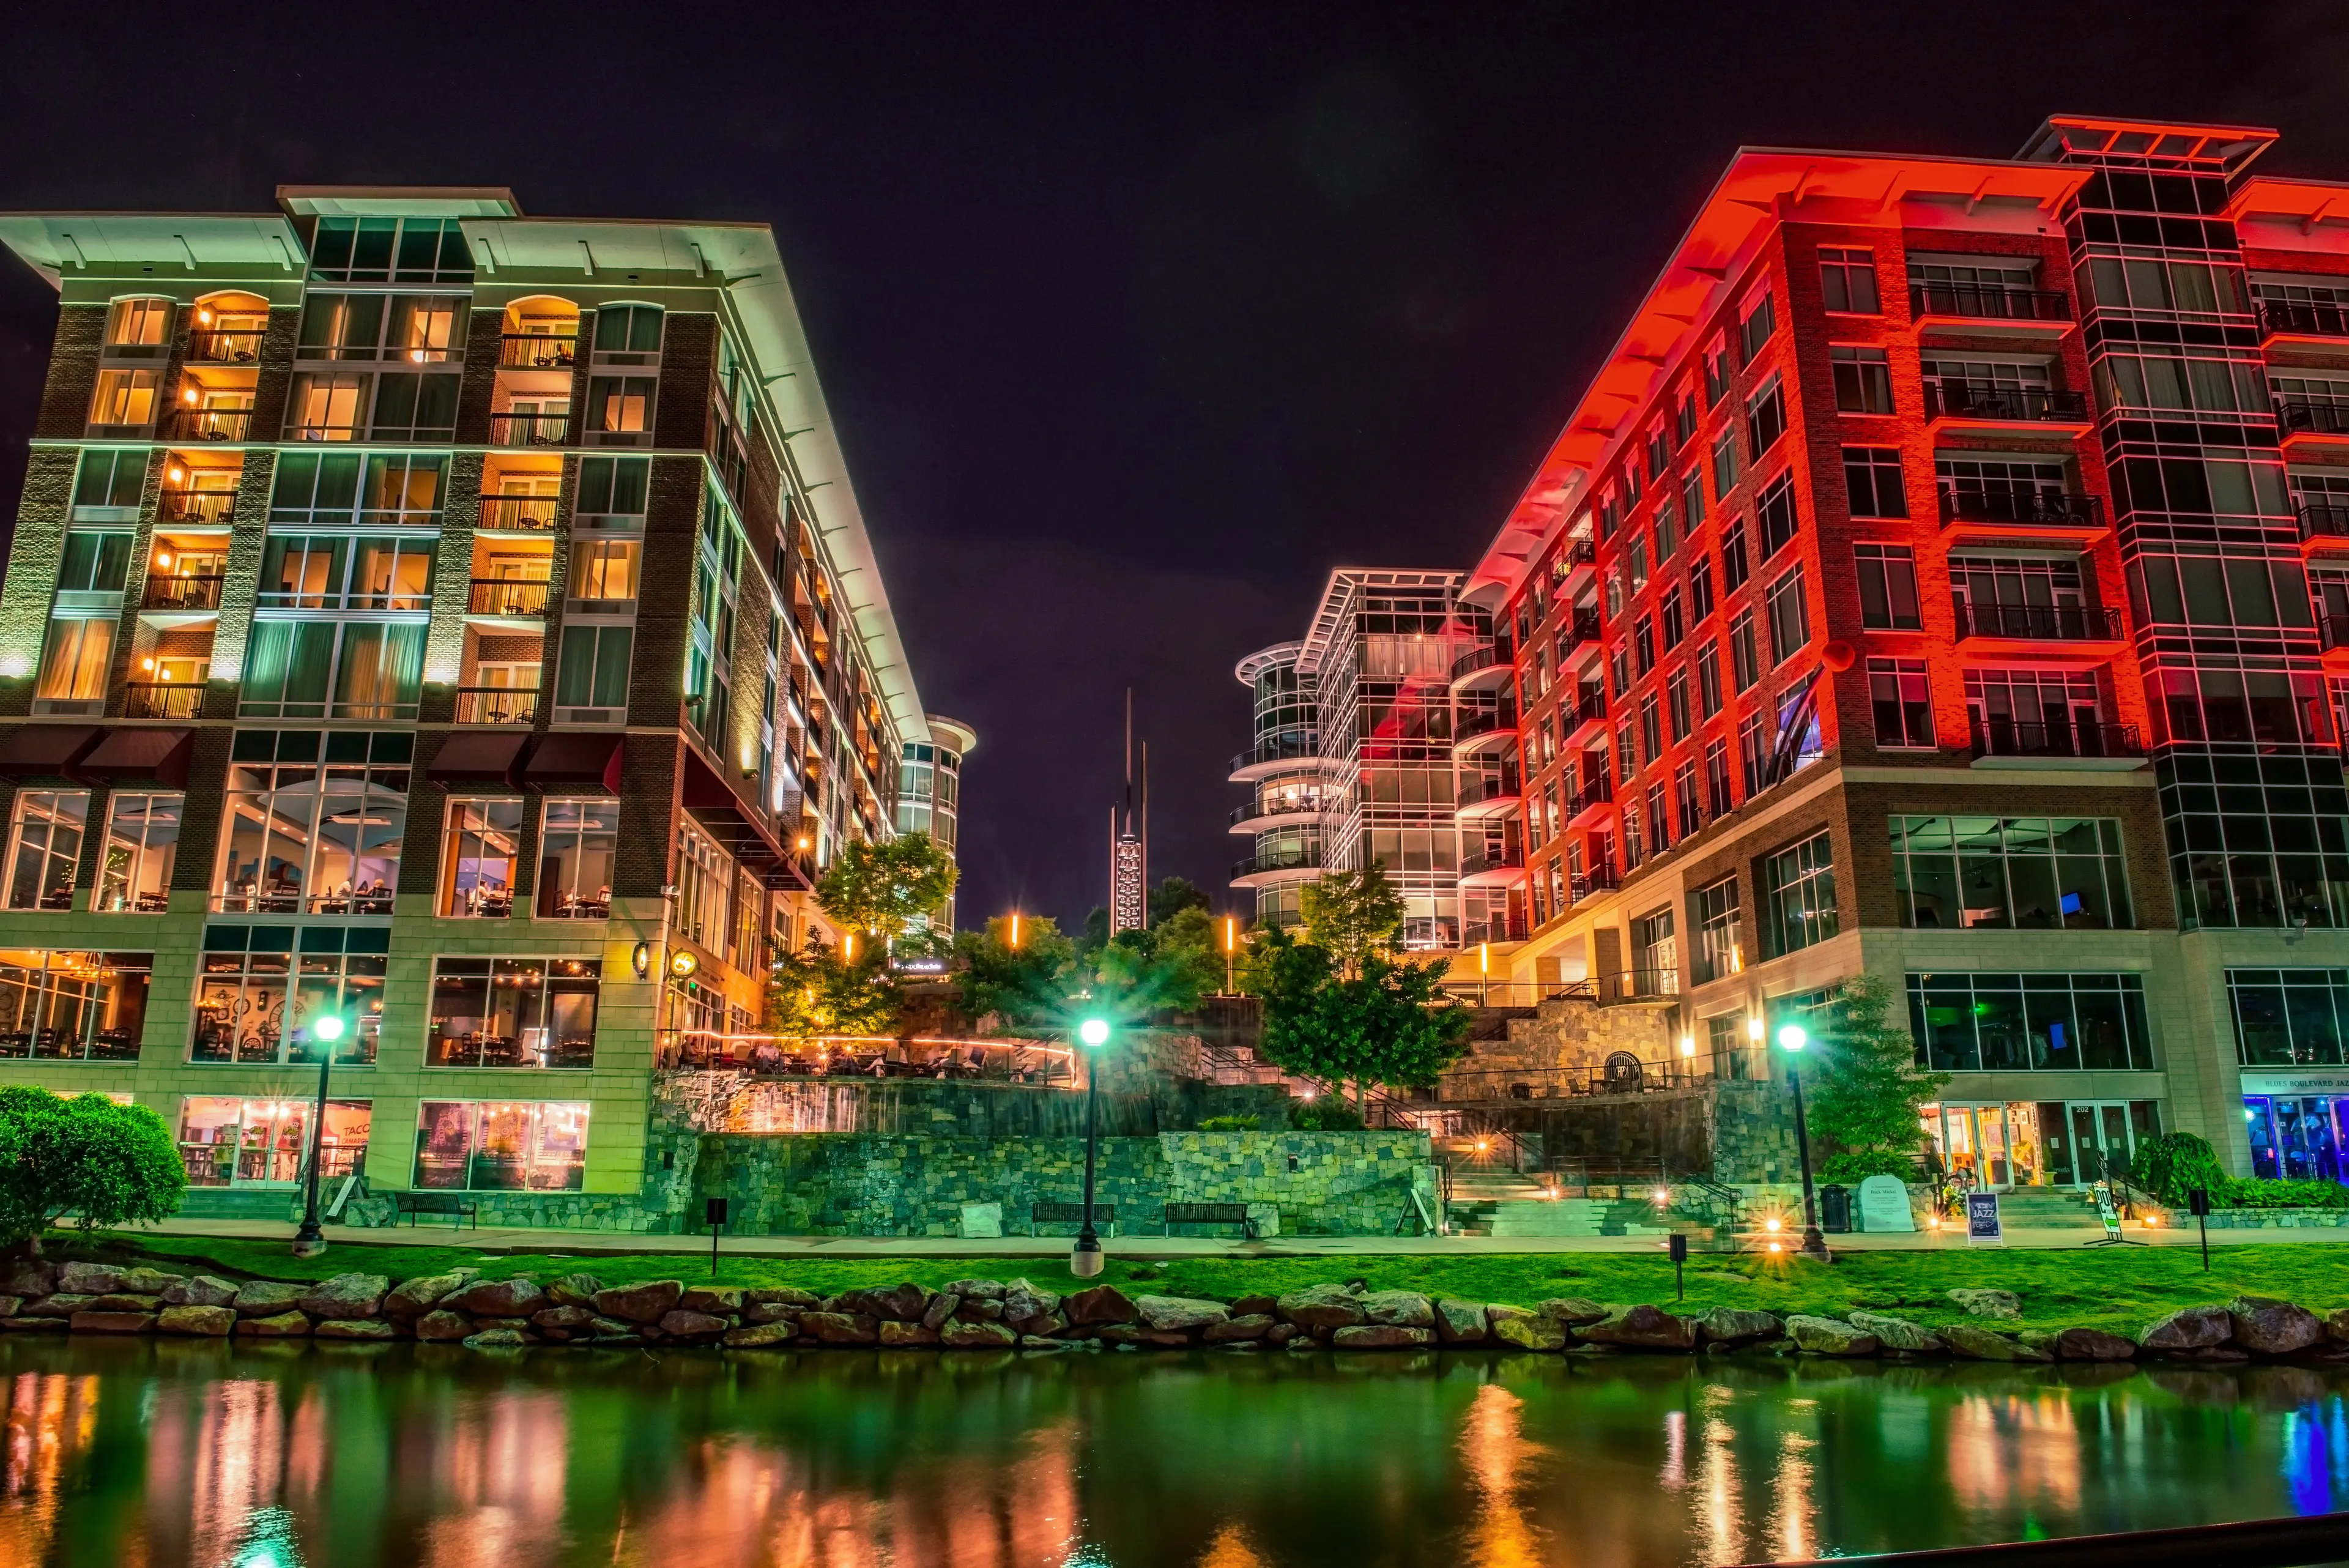 Greenville buildings on the river at night